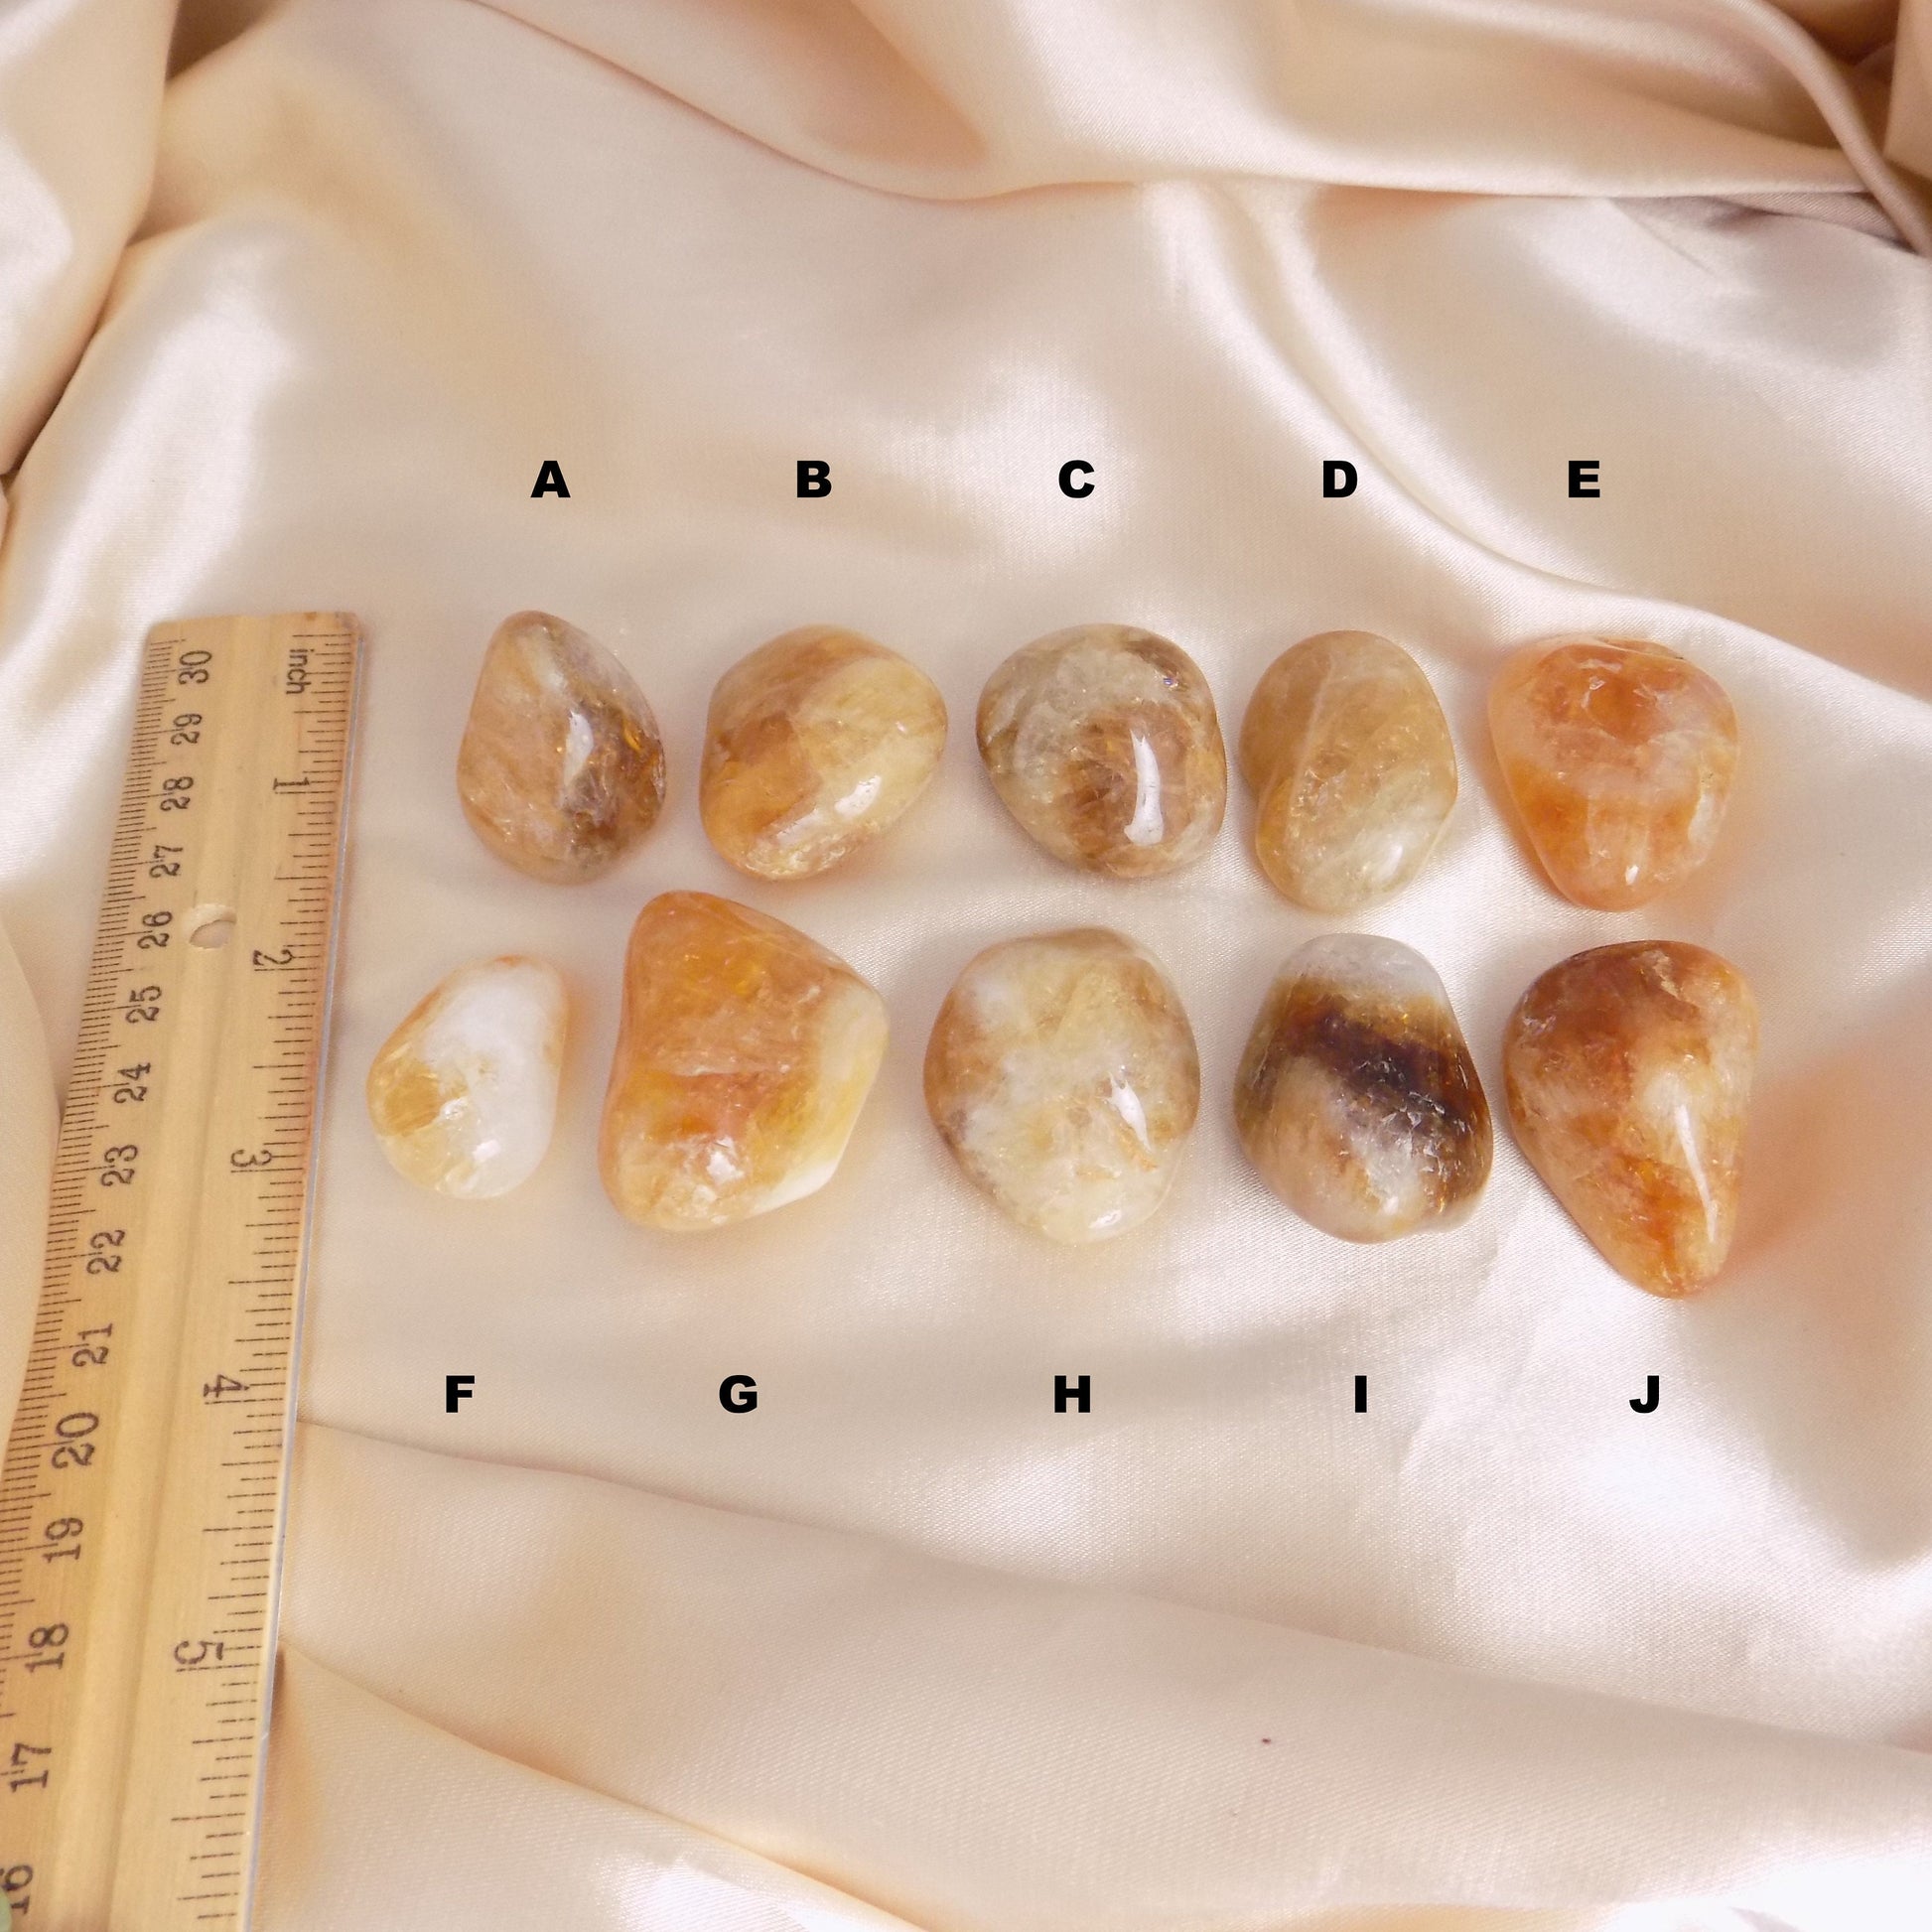 Tumbled Citrine Crystal, Yellow Brown Crystals, Boho Home Decor, Coffee Table Accessories, Healing Crystals Spiritual, G15-173